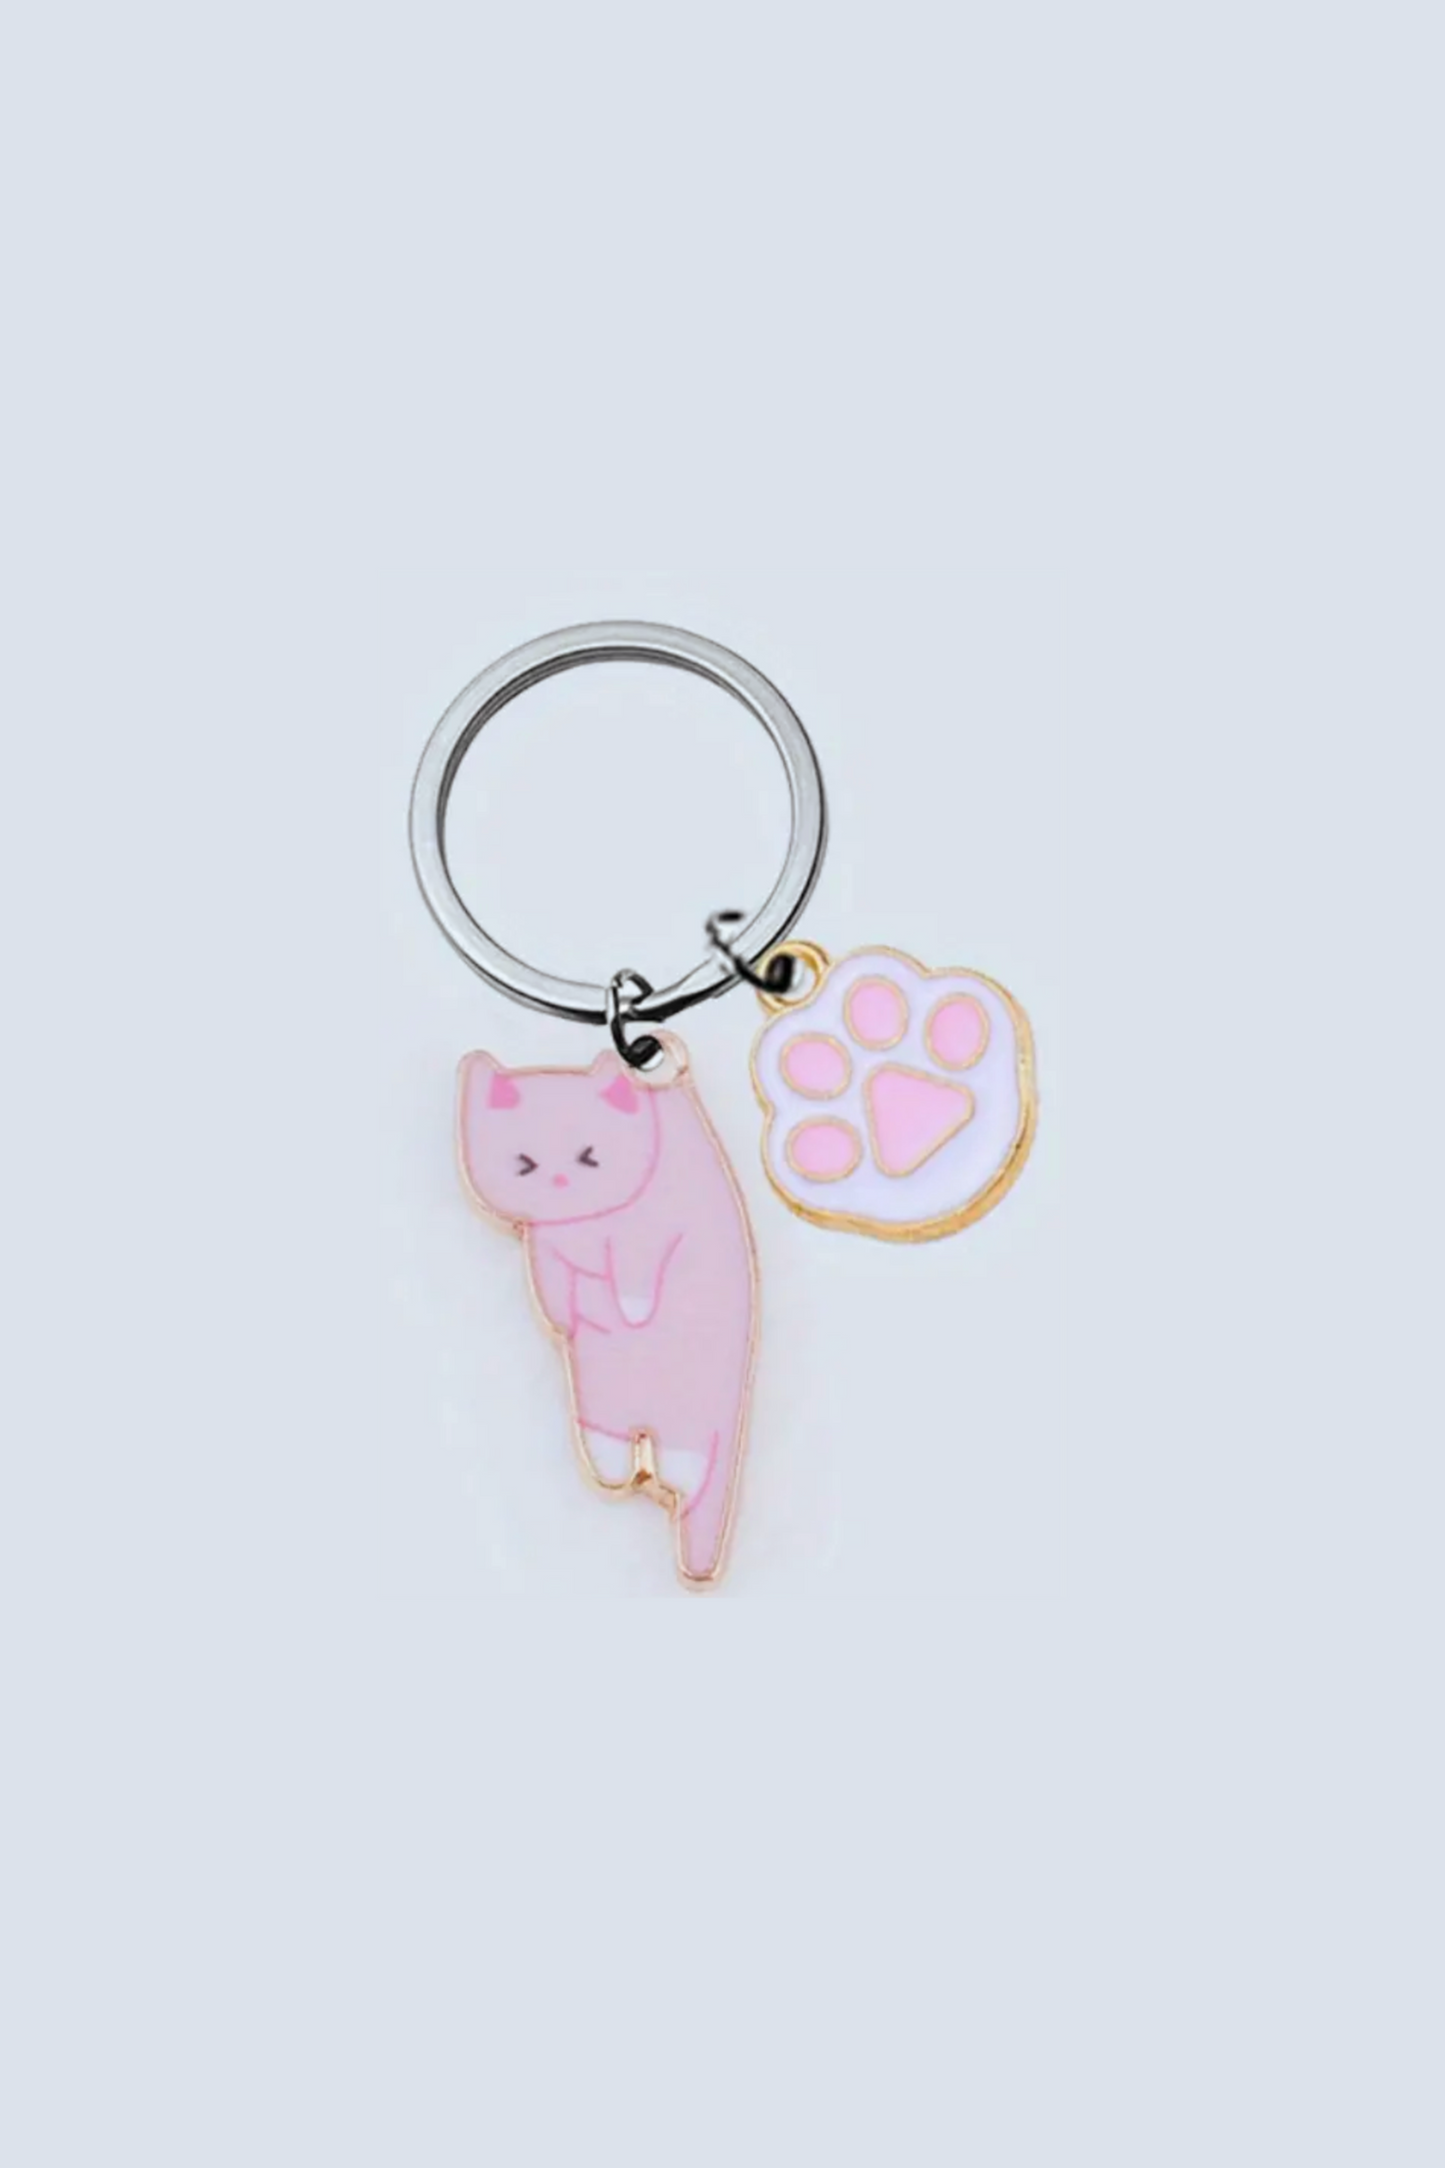 Cat and Paw Charm Keychains